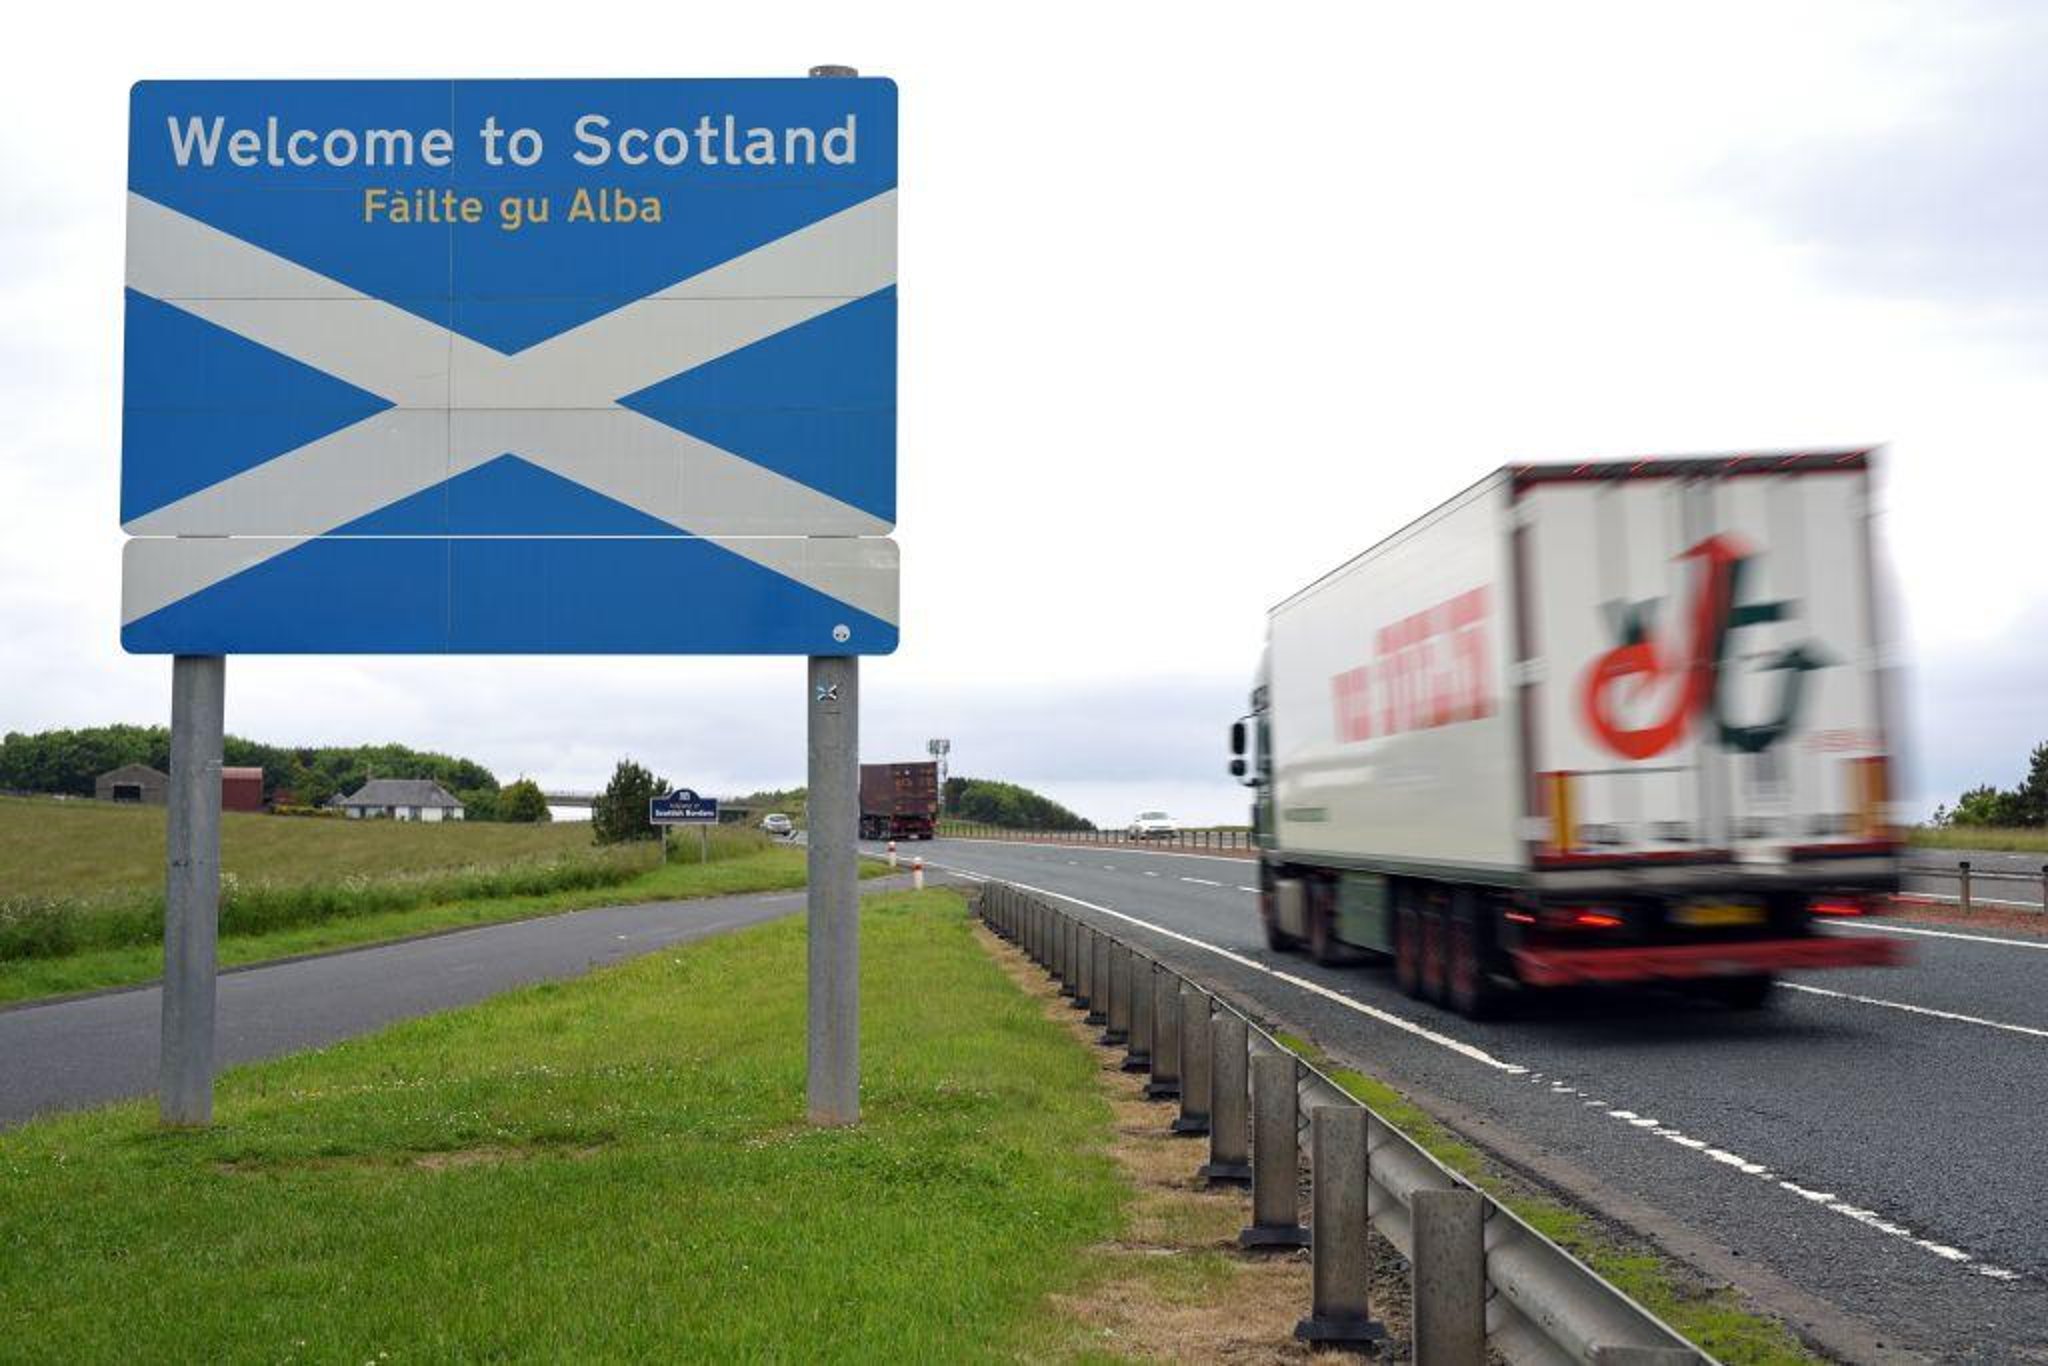 Can I Travel To England From Scotland Border Rules And Fines For Breaking Them Explained The Scotsman